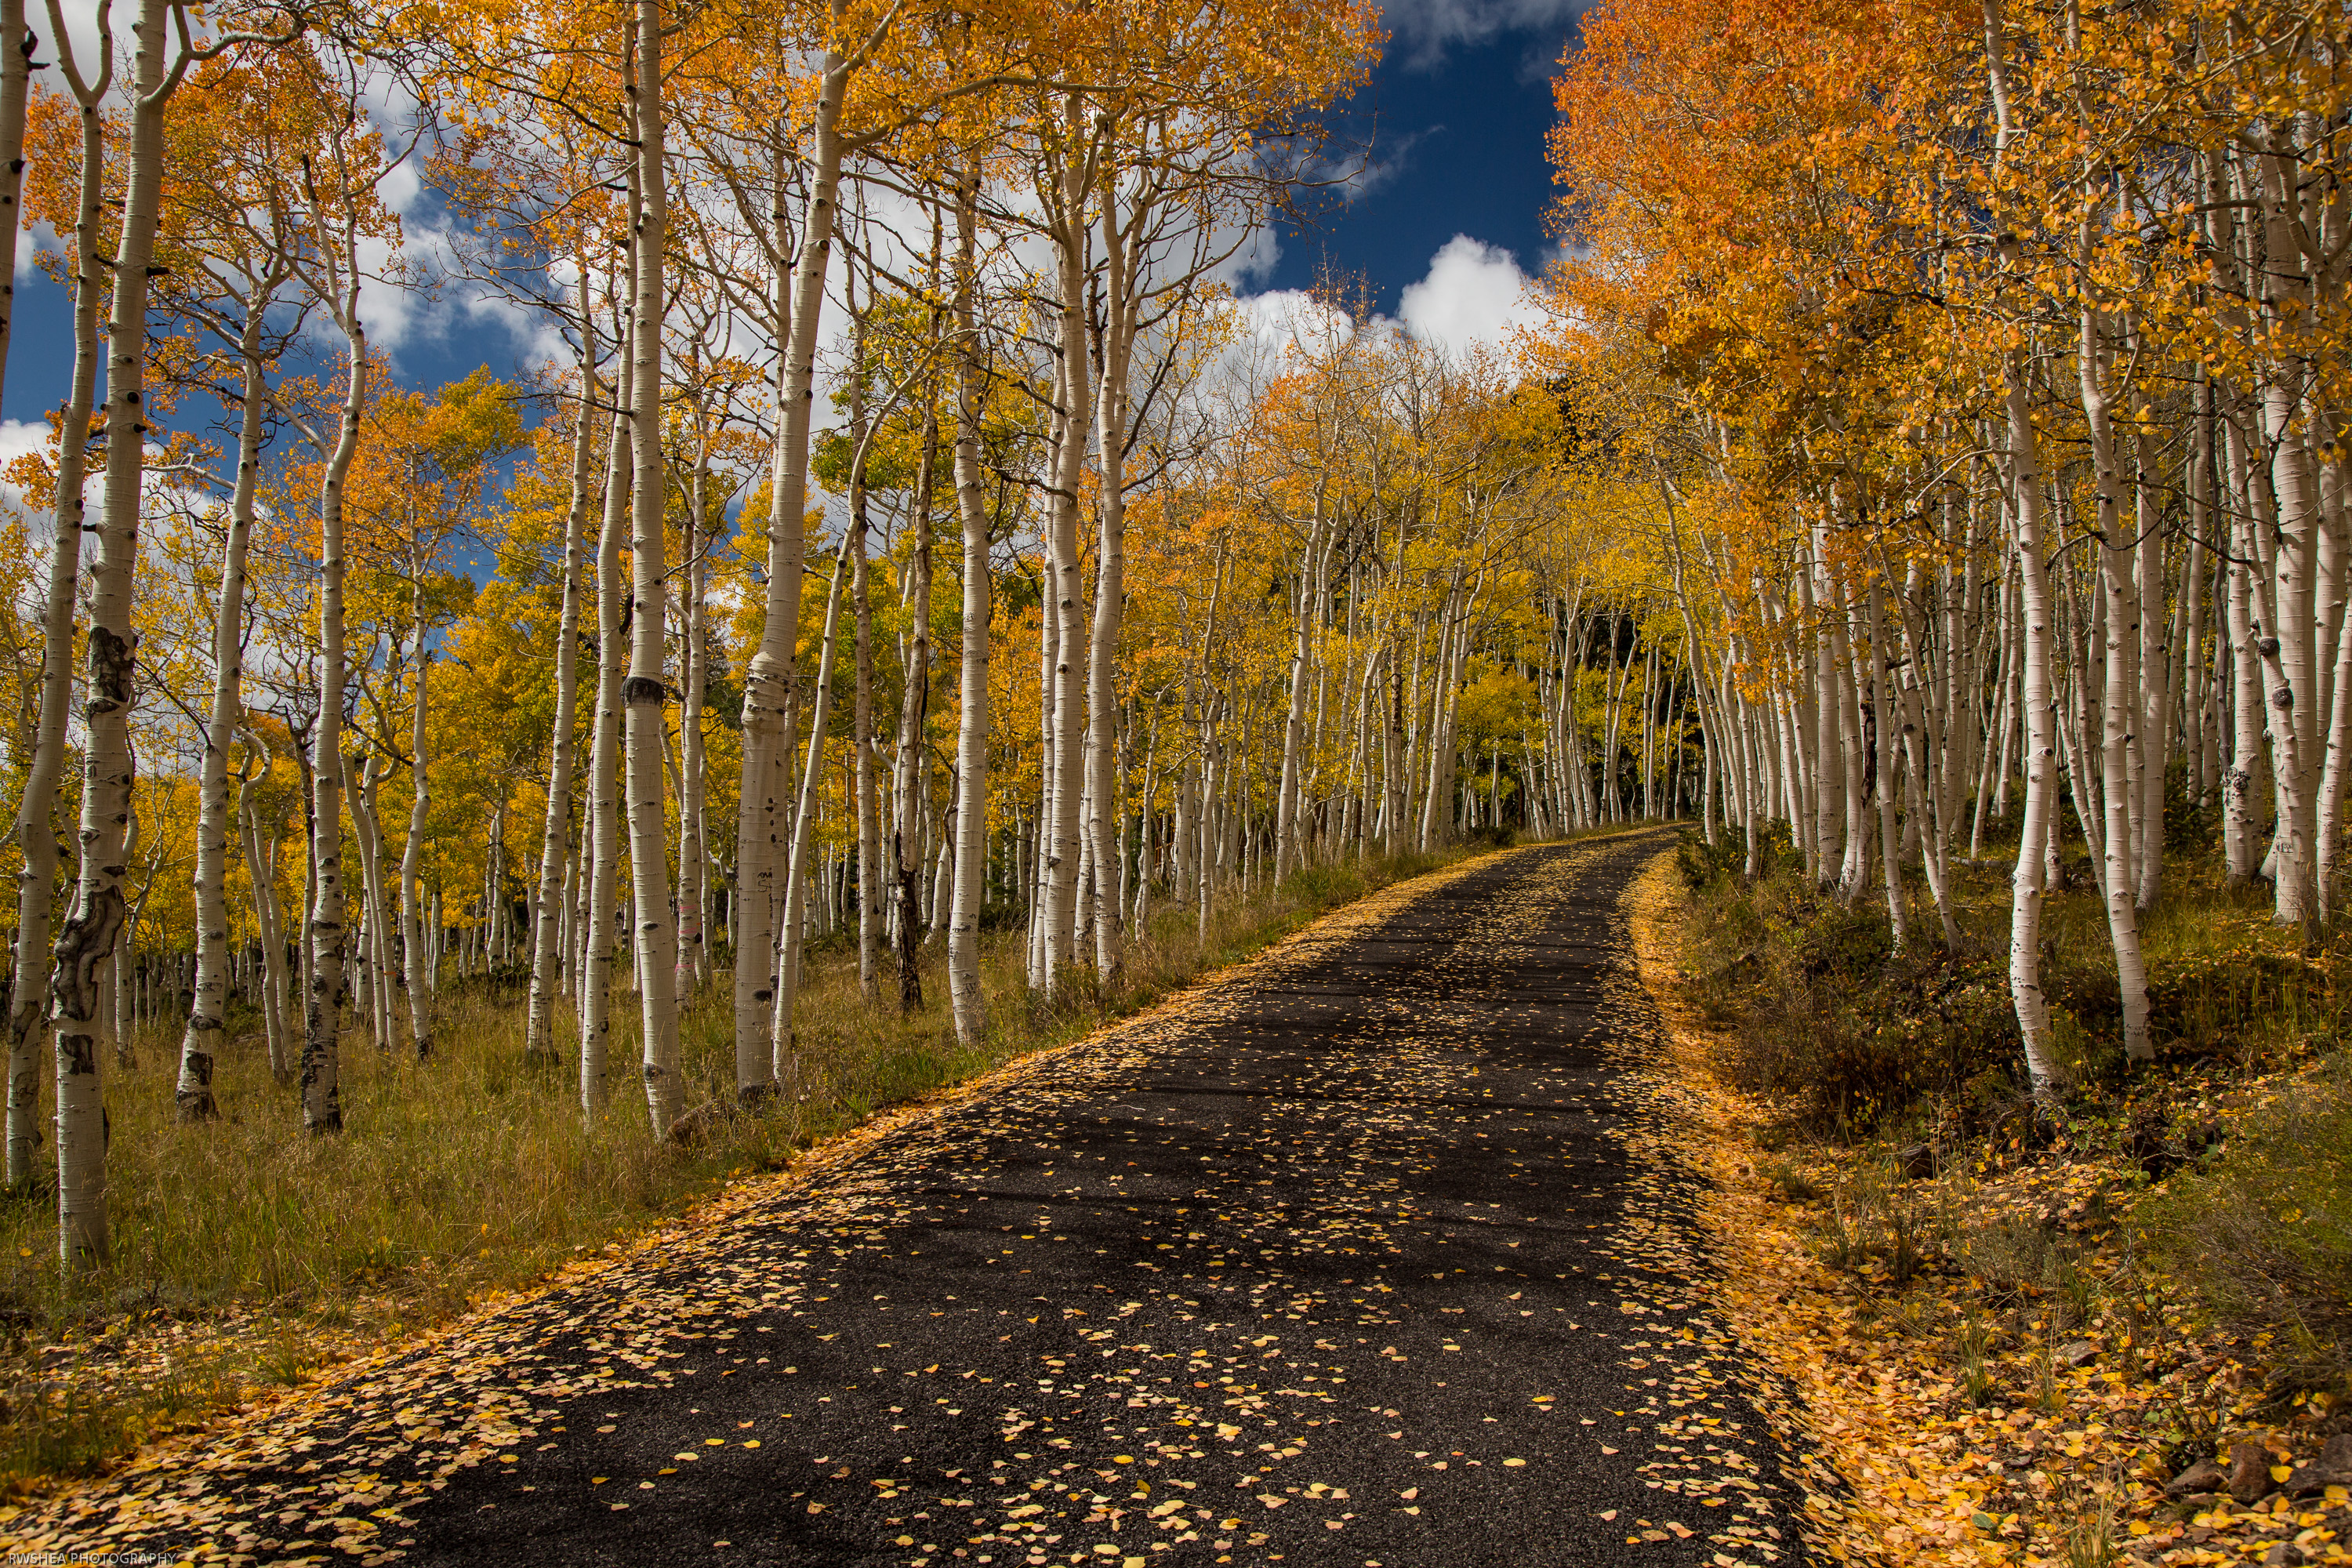 Believe it or not, the aspens on both sides of this road are all one tree. Credit: Robert Shea via Flickr.